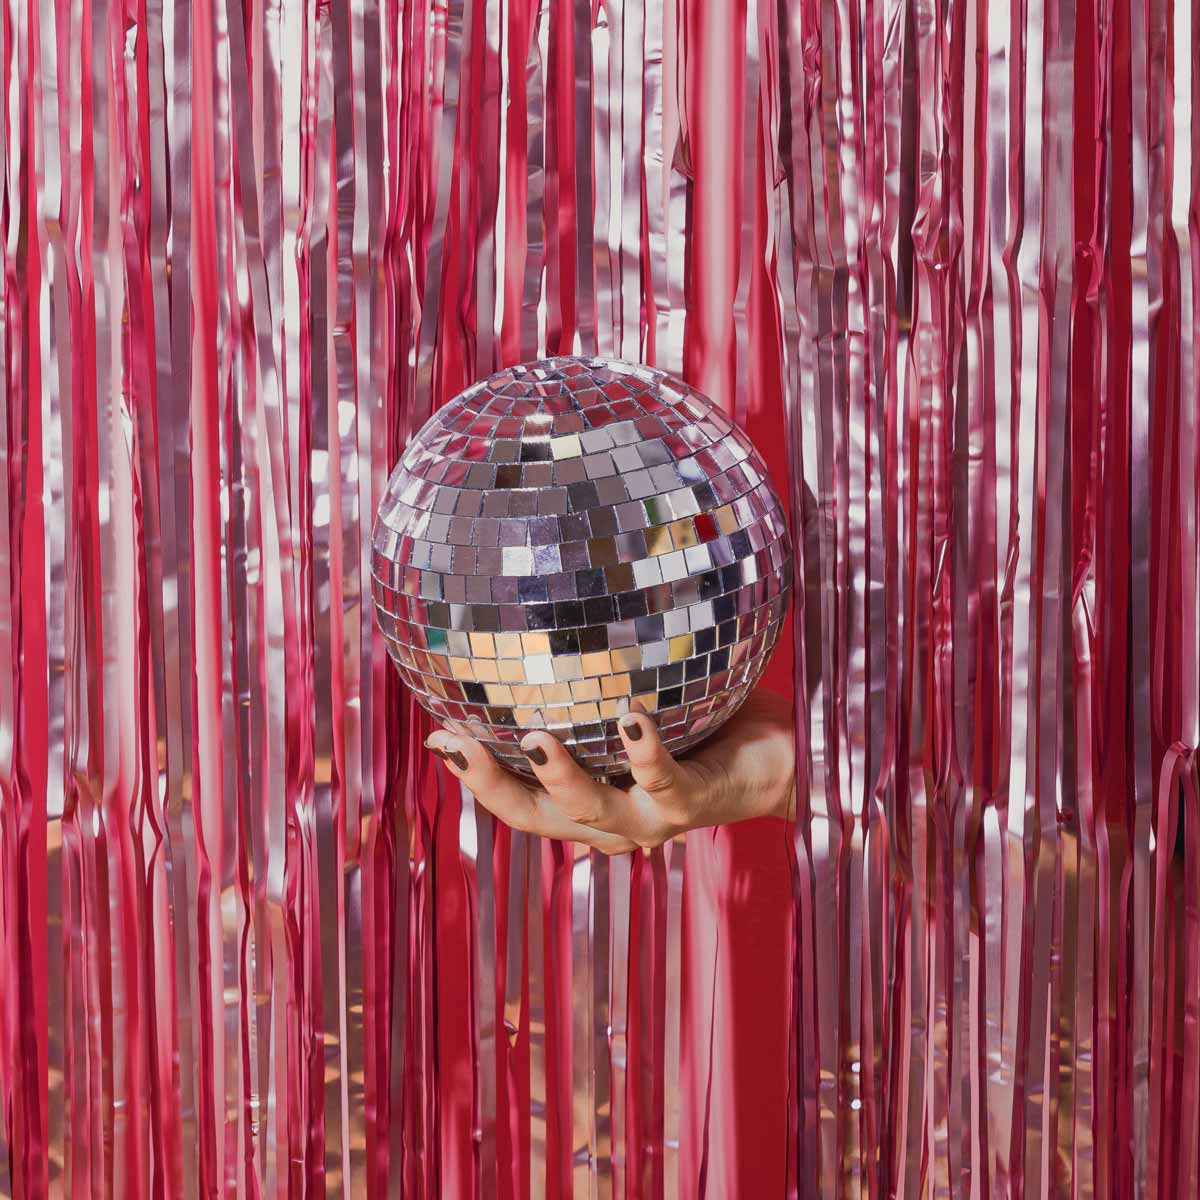 A woman's hand holding a disco ball through party streamers